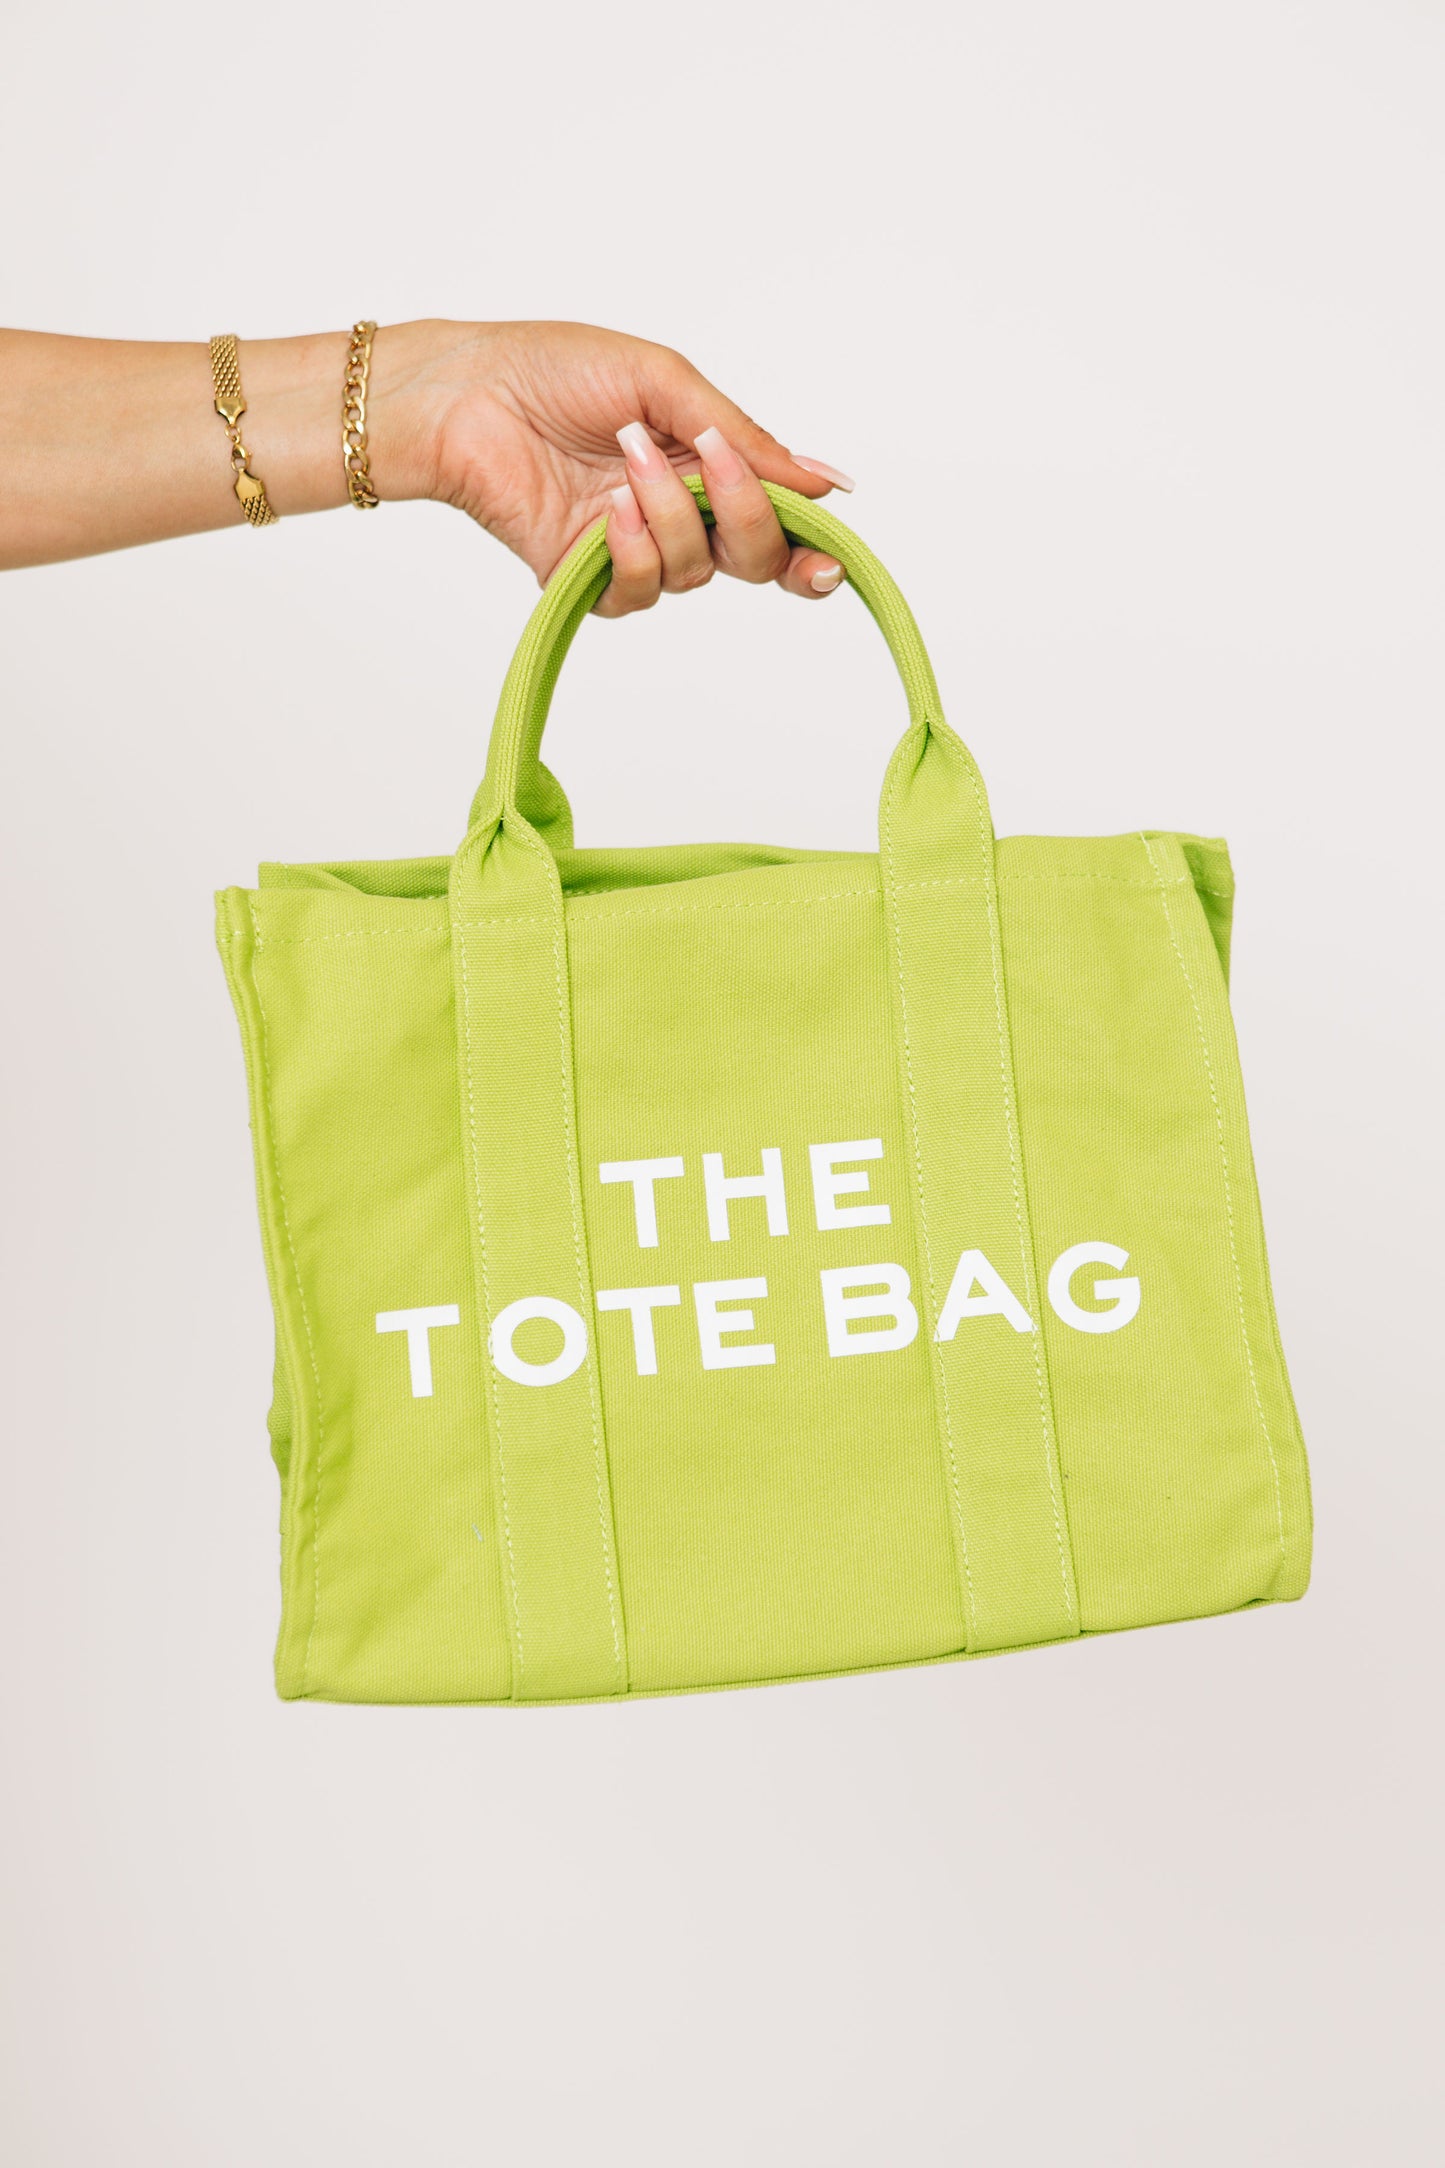 RESTOCKED 7/26/23 - The Canvas Tote Bag